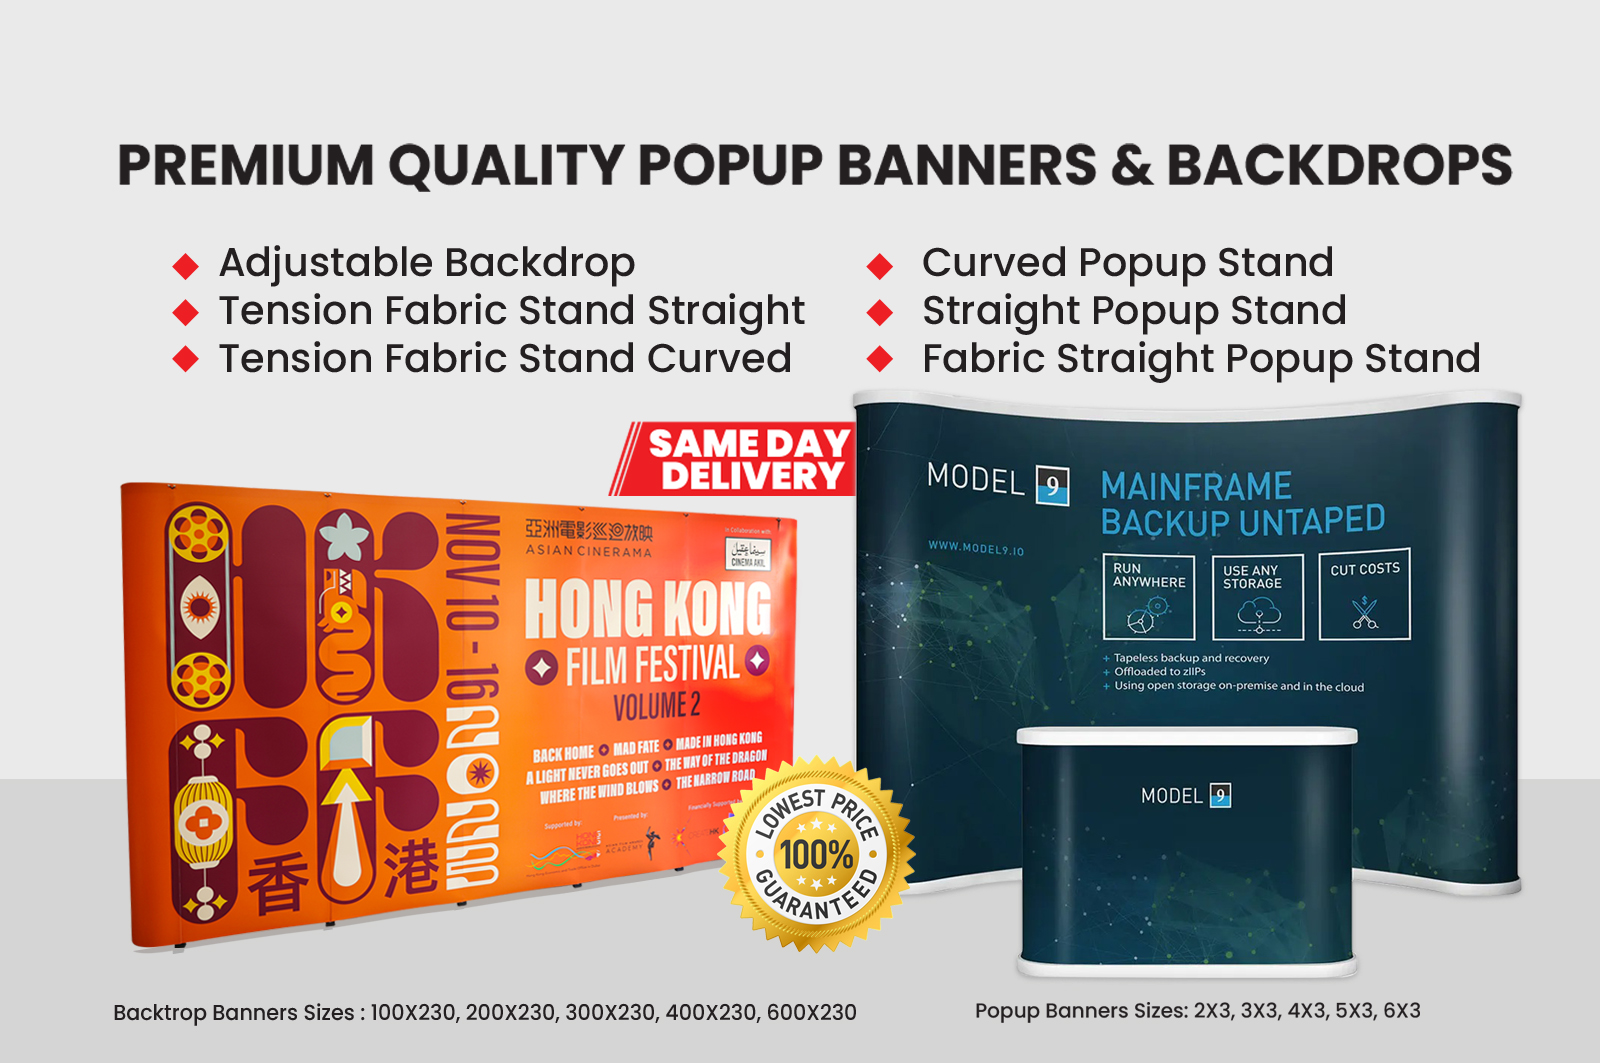 Pop-Up & Backdrop Banner Printing in Dubai at Golden Point adds 